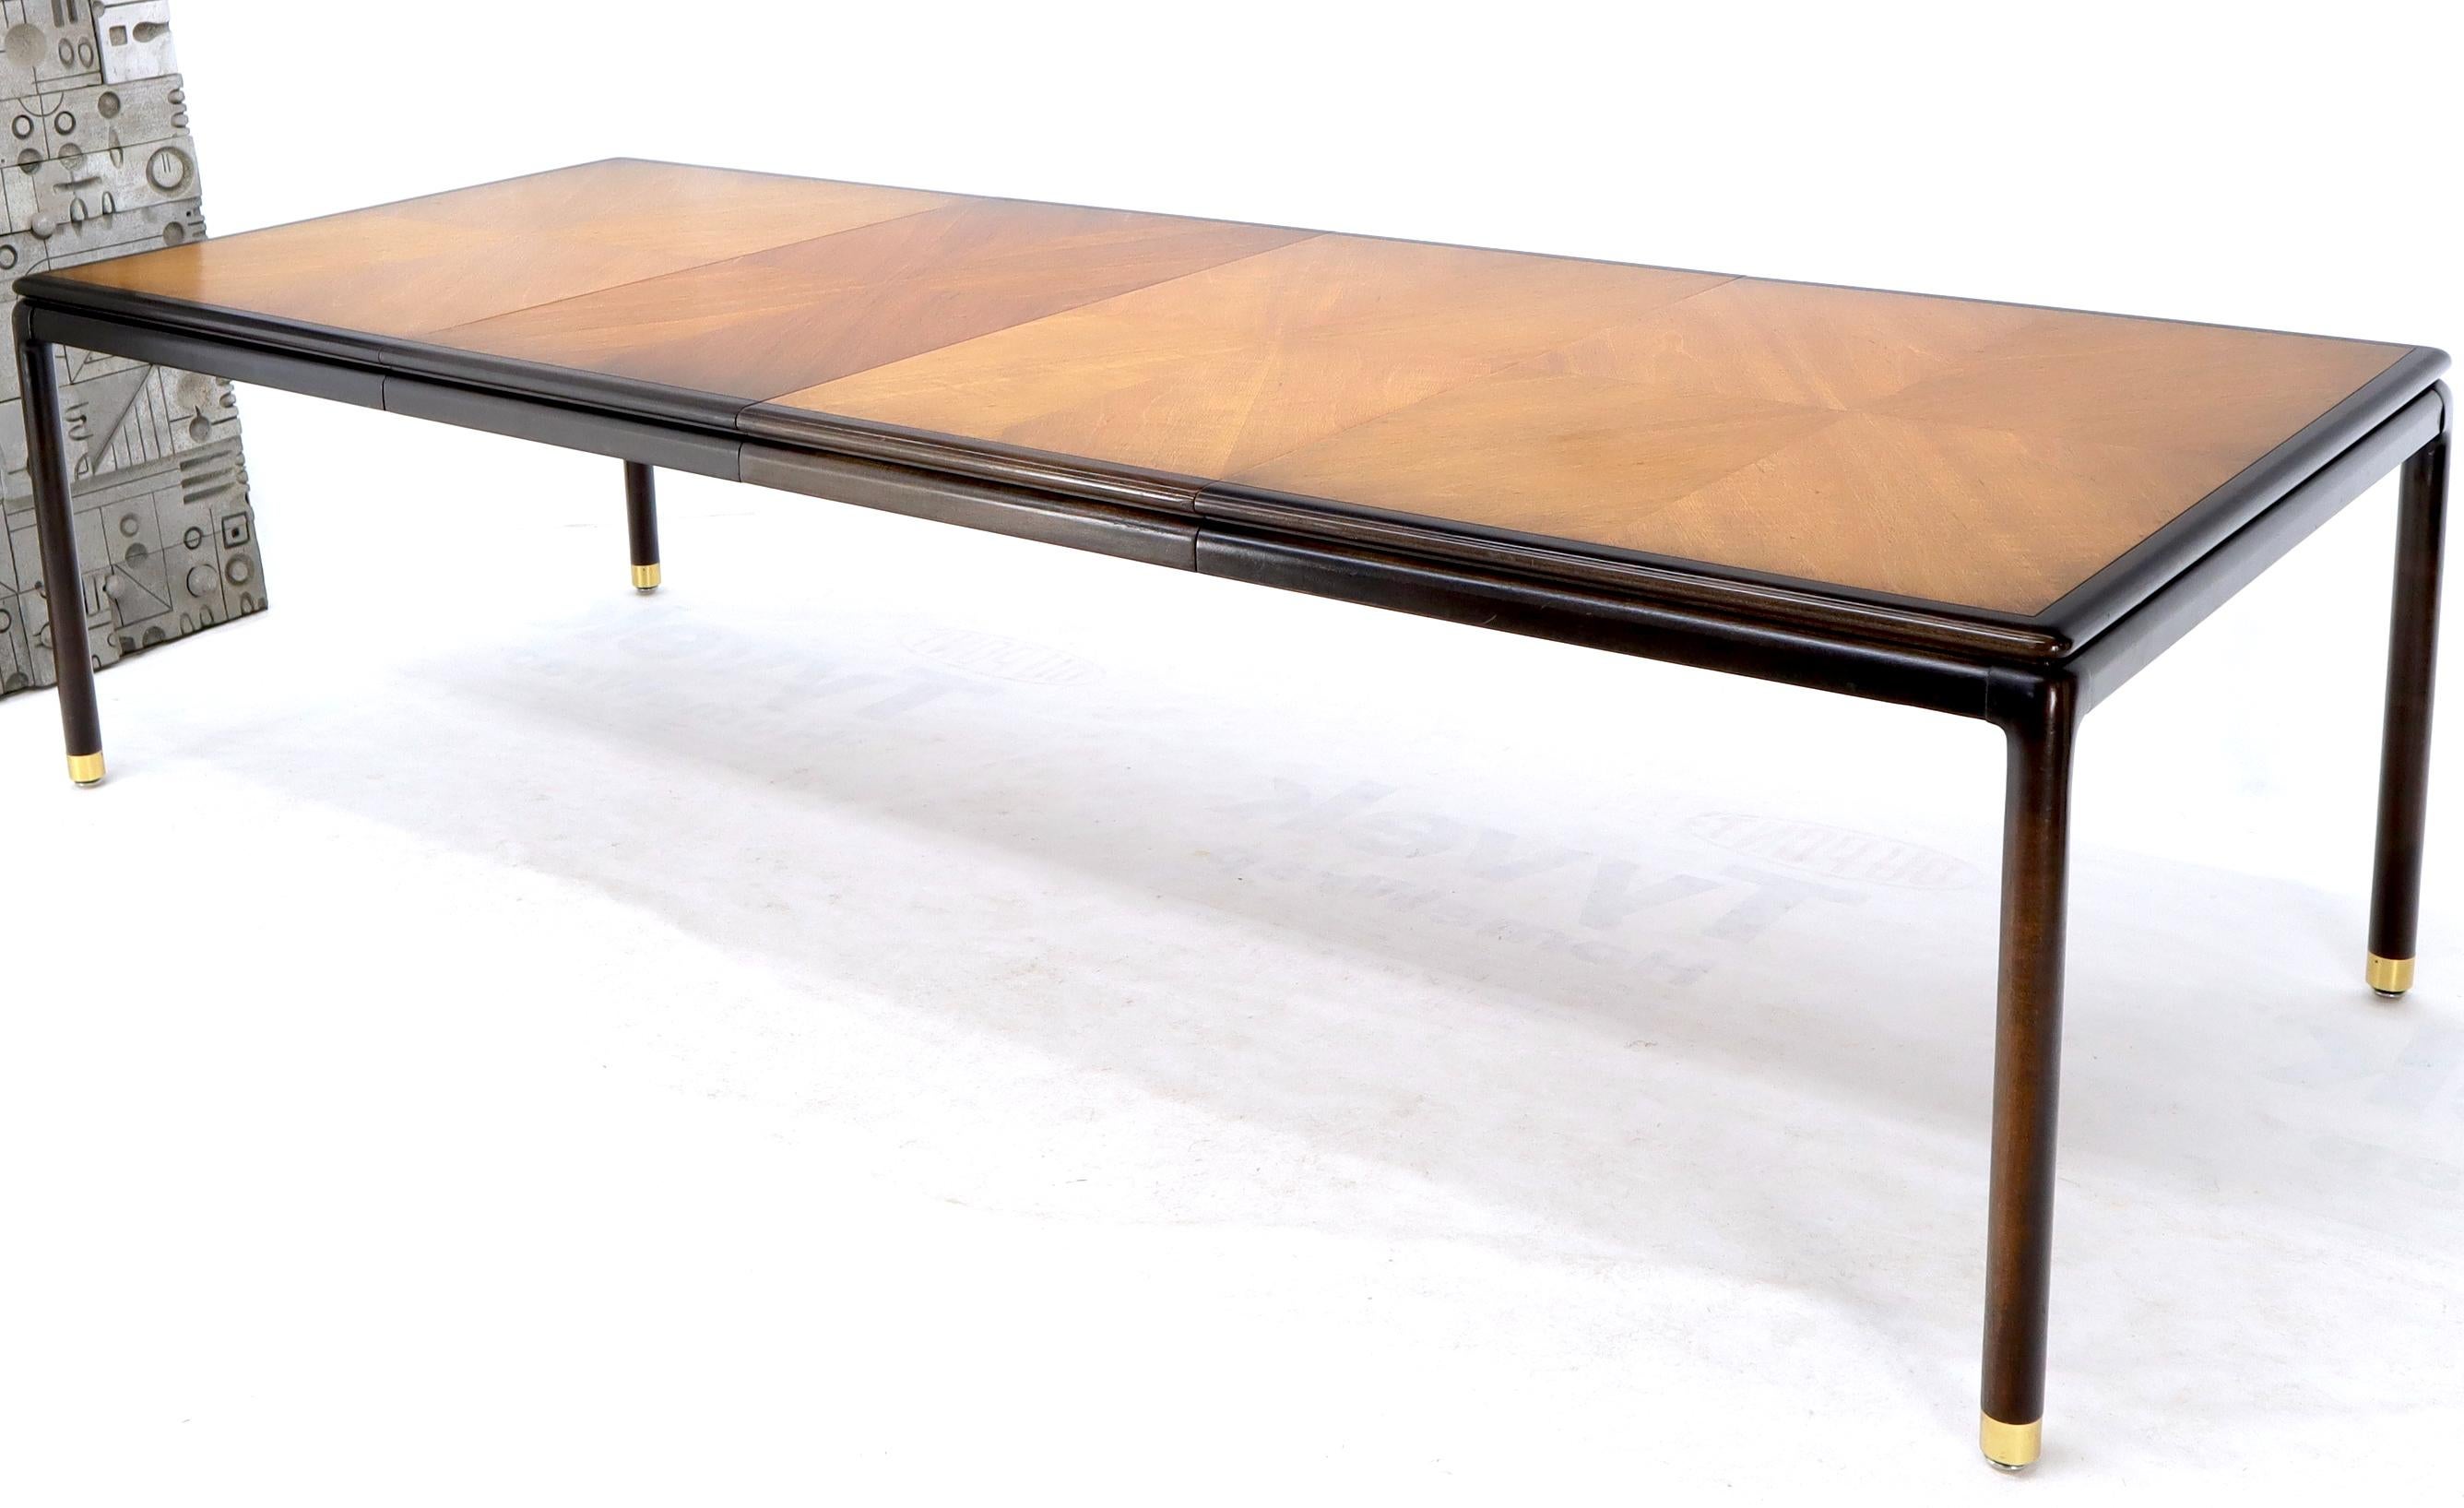 Mahogany Danish Mid-Century Modern Large Two-Tone Dining Room Table with 2 Leaves For Sale